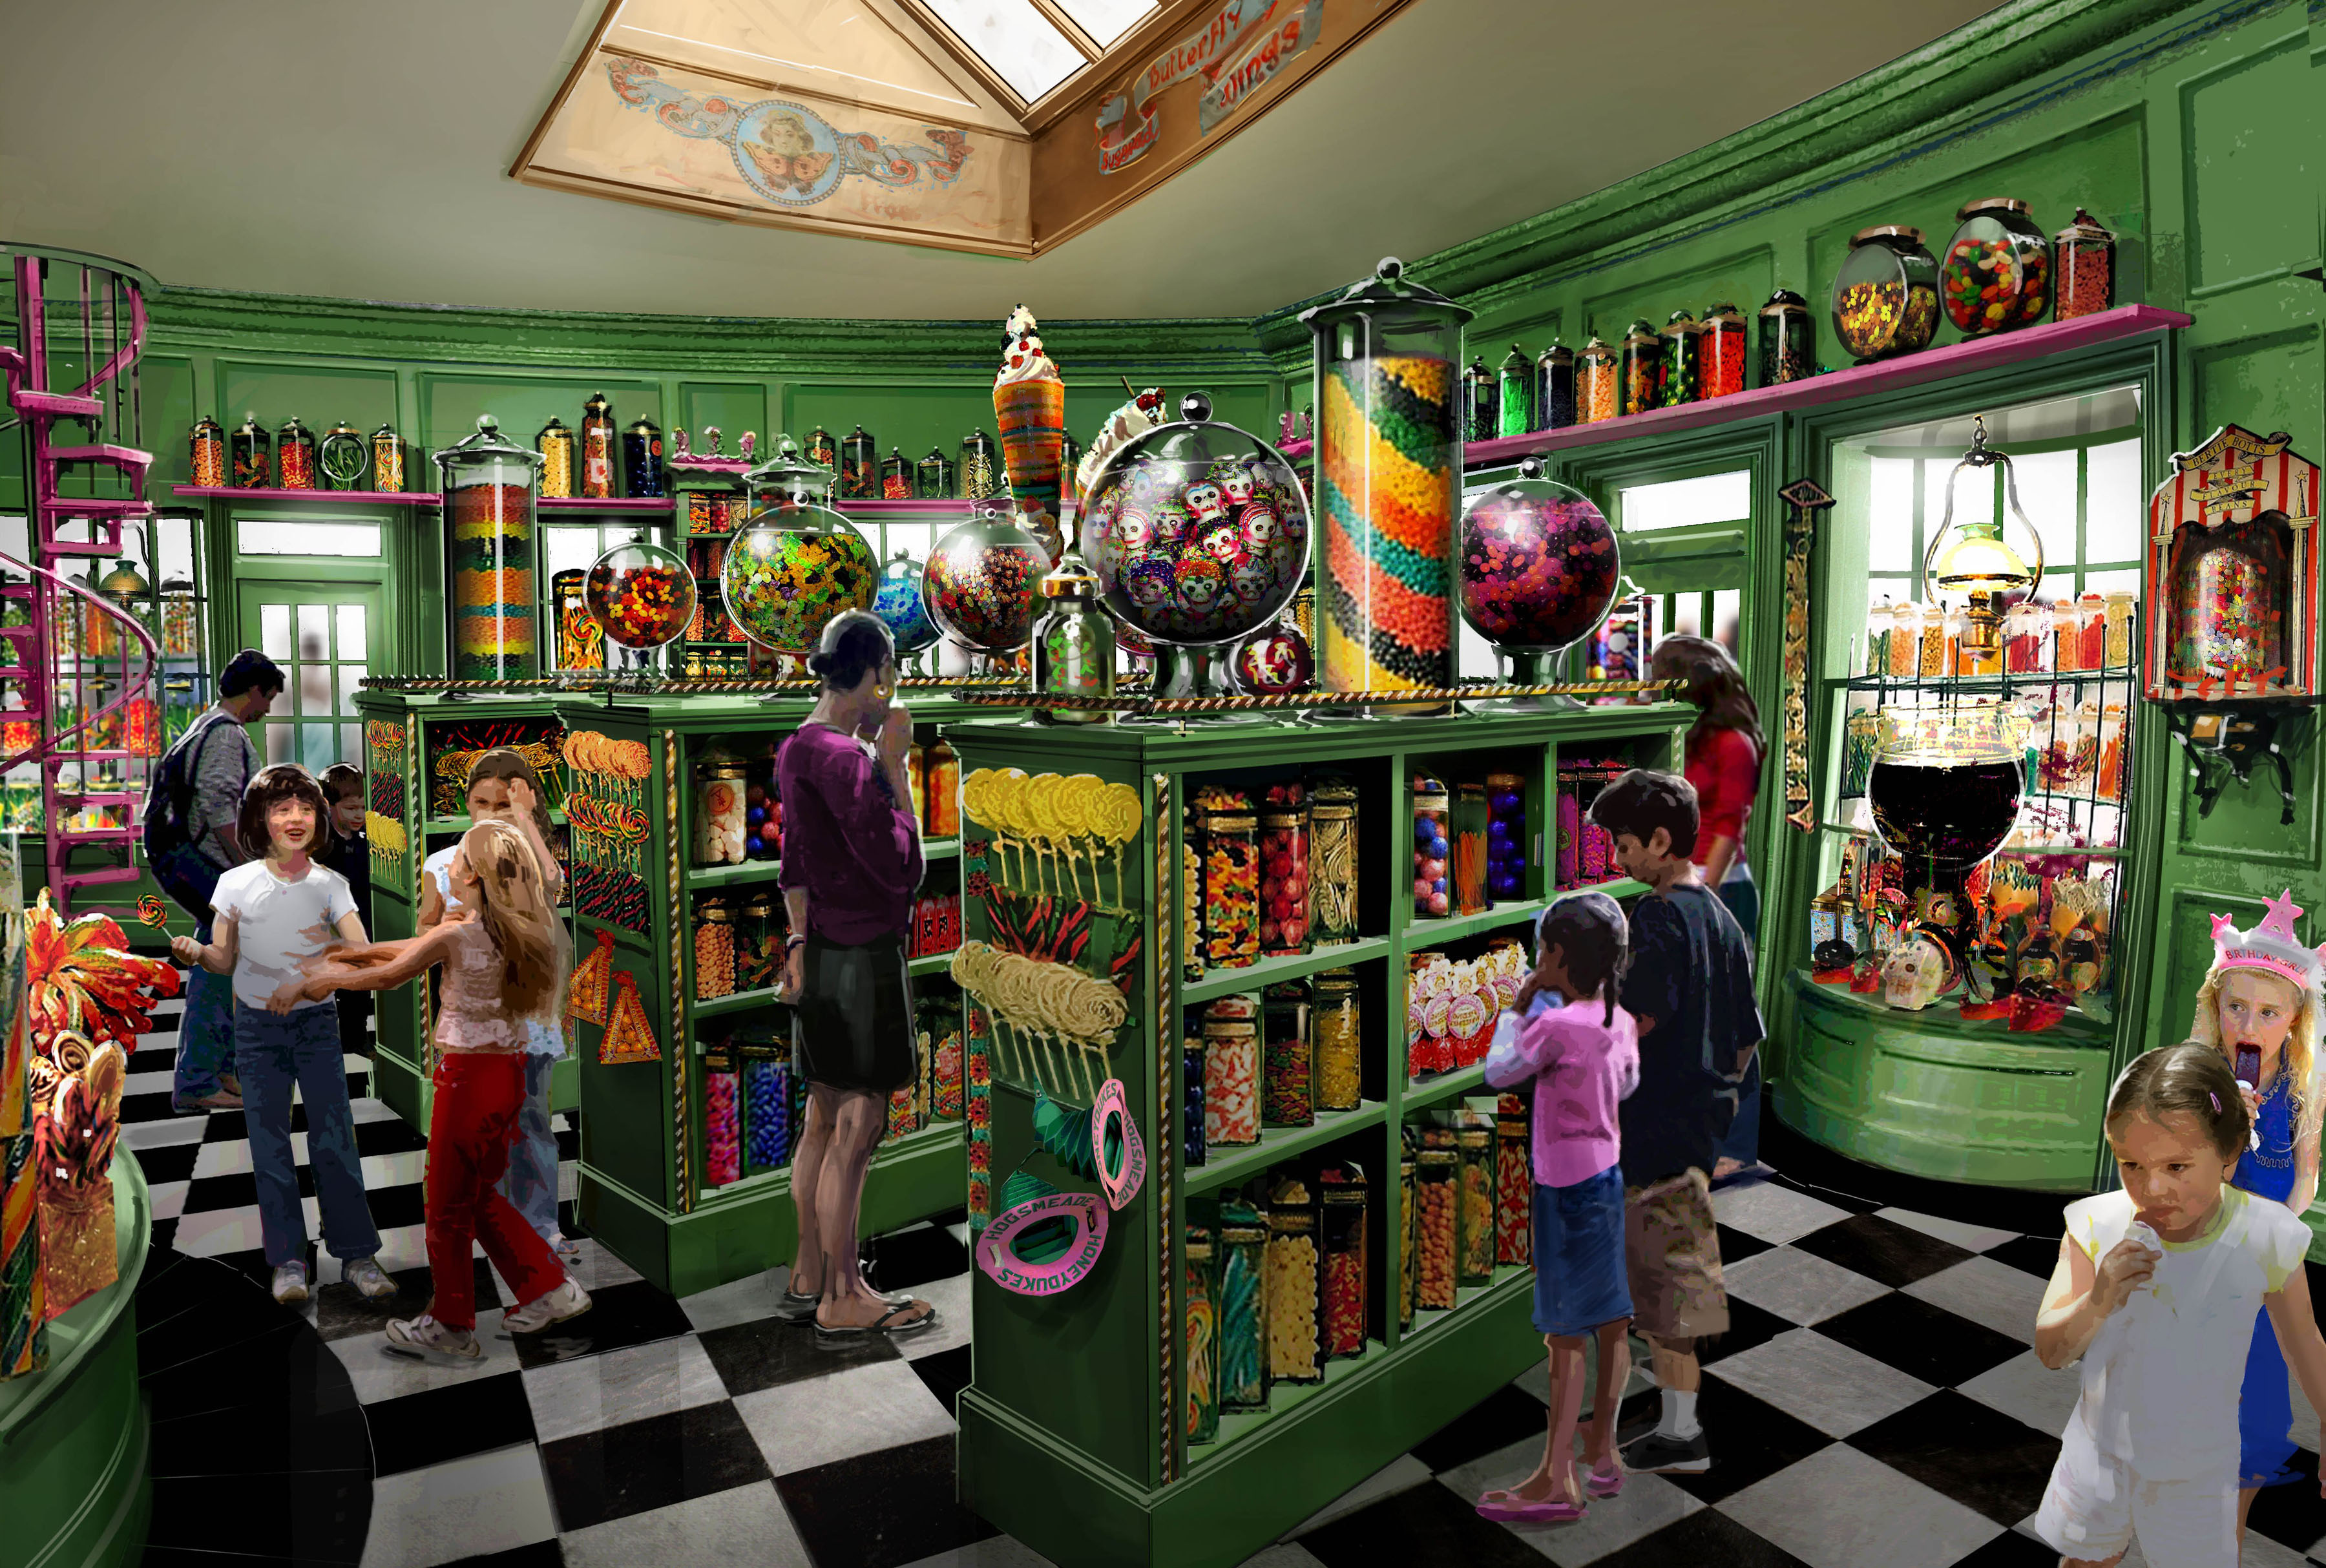 Free download Honeydukes Candy Shop Interior wallpaper Click picture for high [3600x2427] for your Desktop, Mobile & Tablet. Explore Wallpaper in Stores. Wallpaper Stores in NJ, Wallpaper to Go